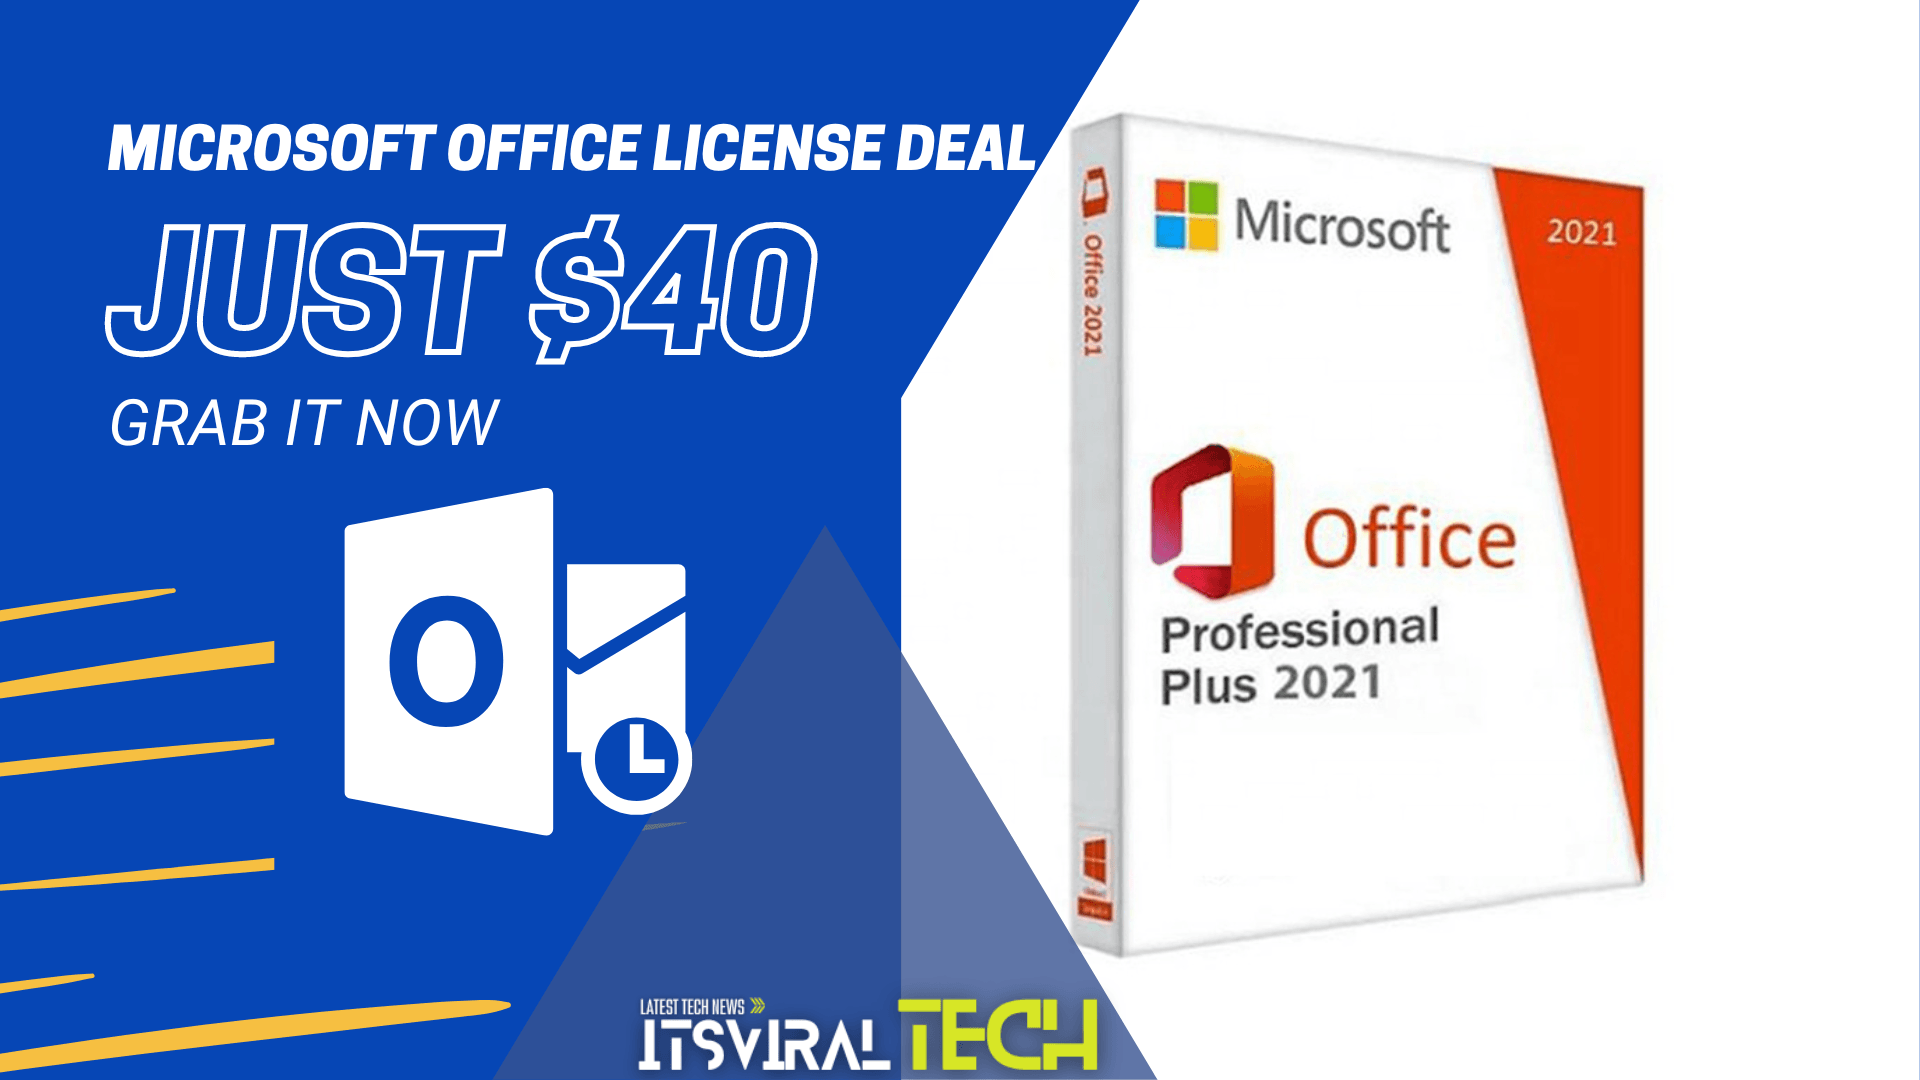 Epic Microsoft Office License Deal | Get 90% Off Now!